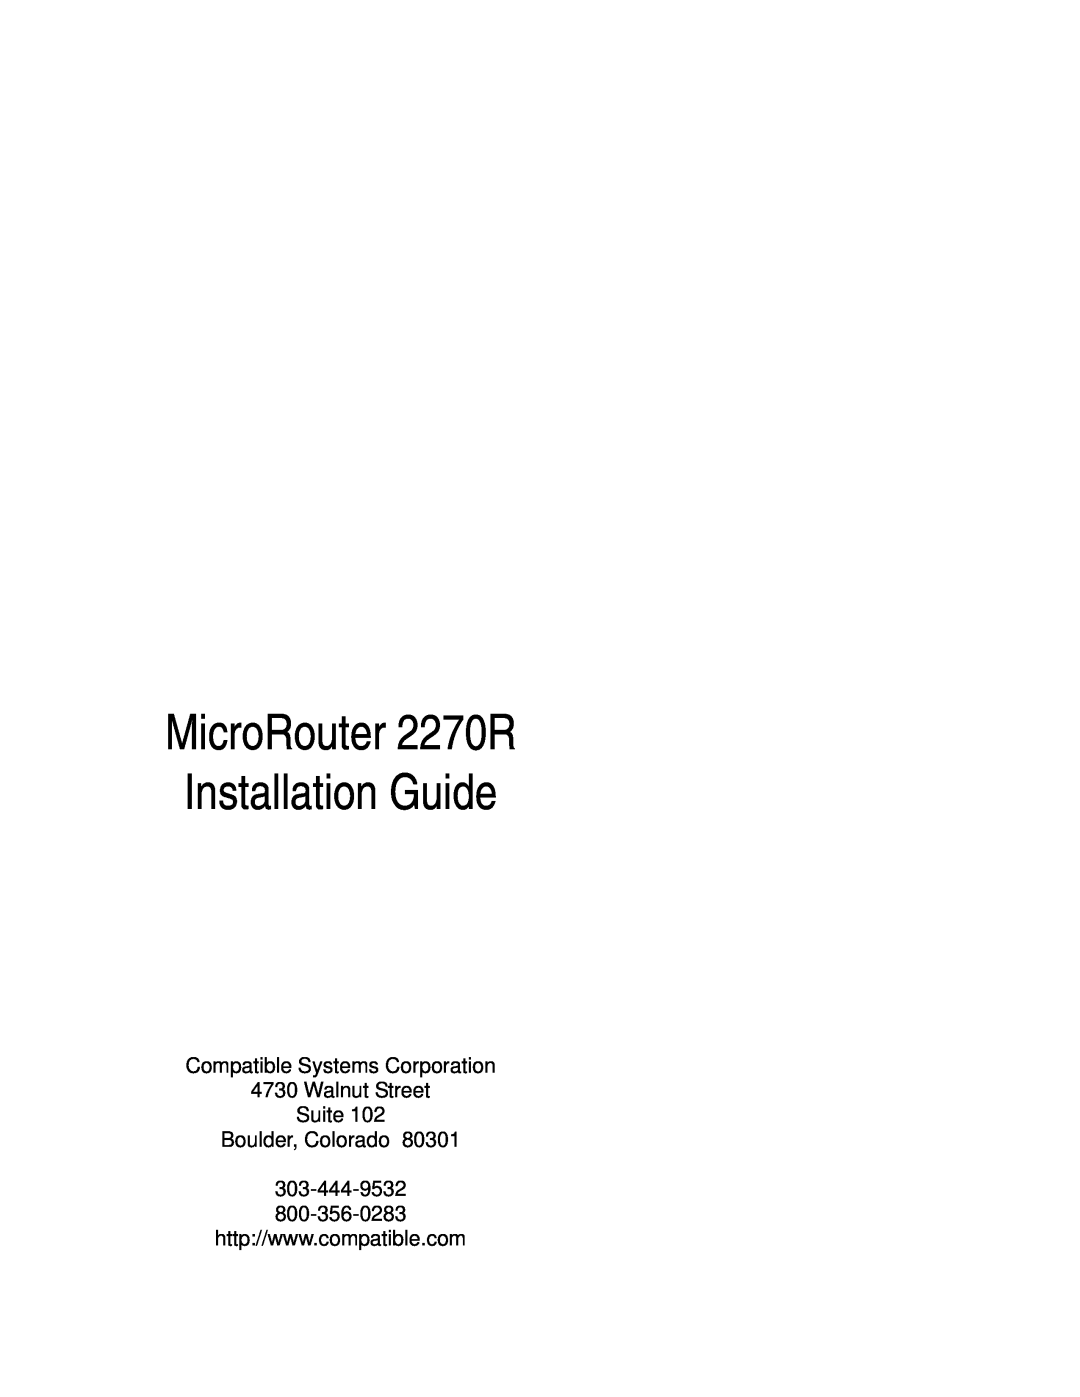 Compatible Systems manual MicroRouter 2270R Installation Guide, Compatible Systems Corporation 4730 Walnut Street Suite 